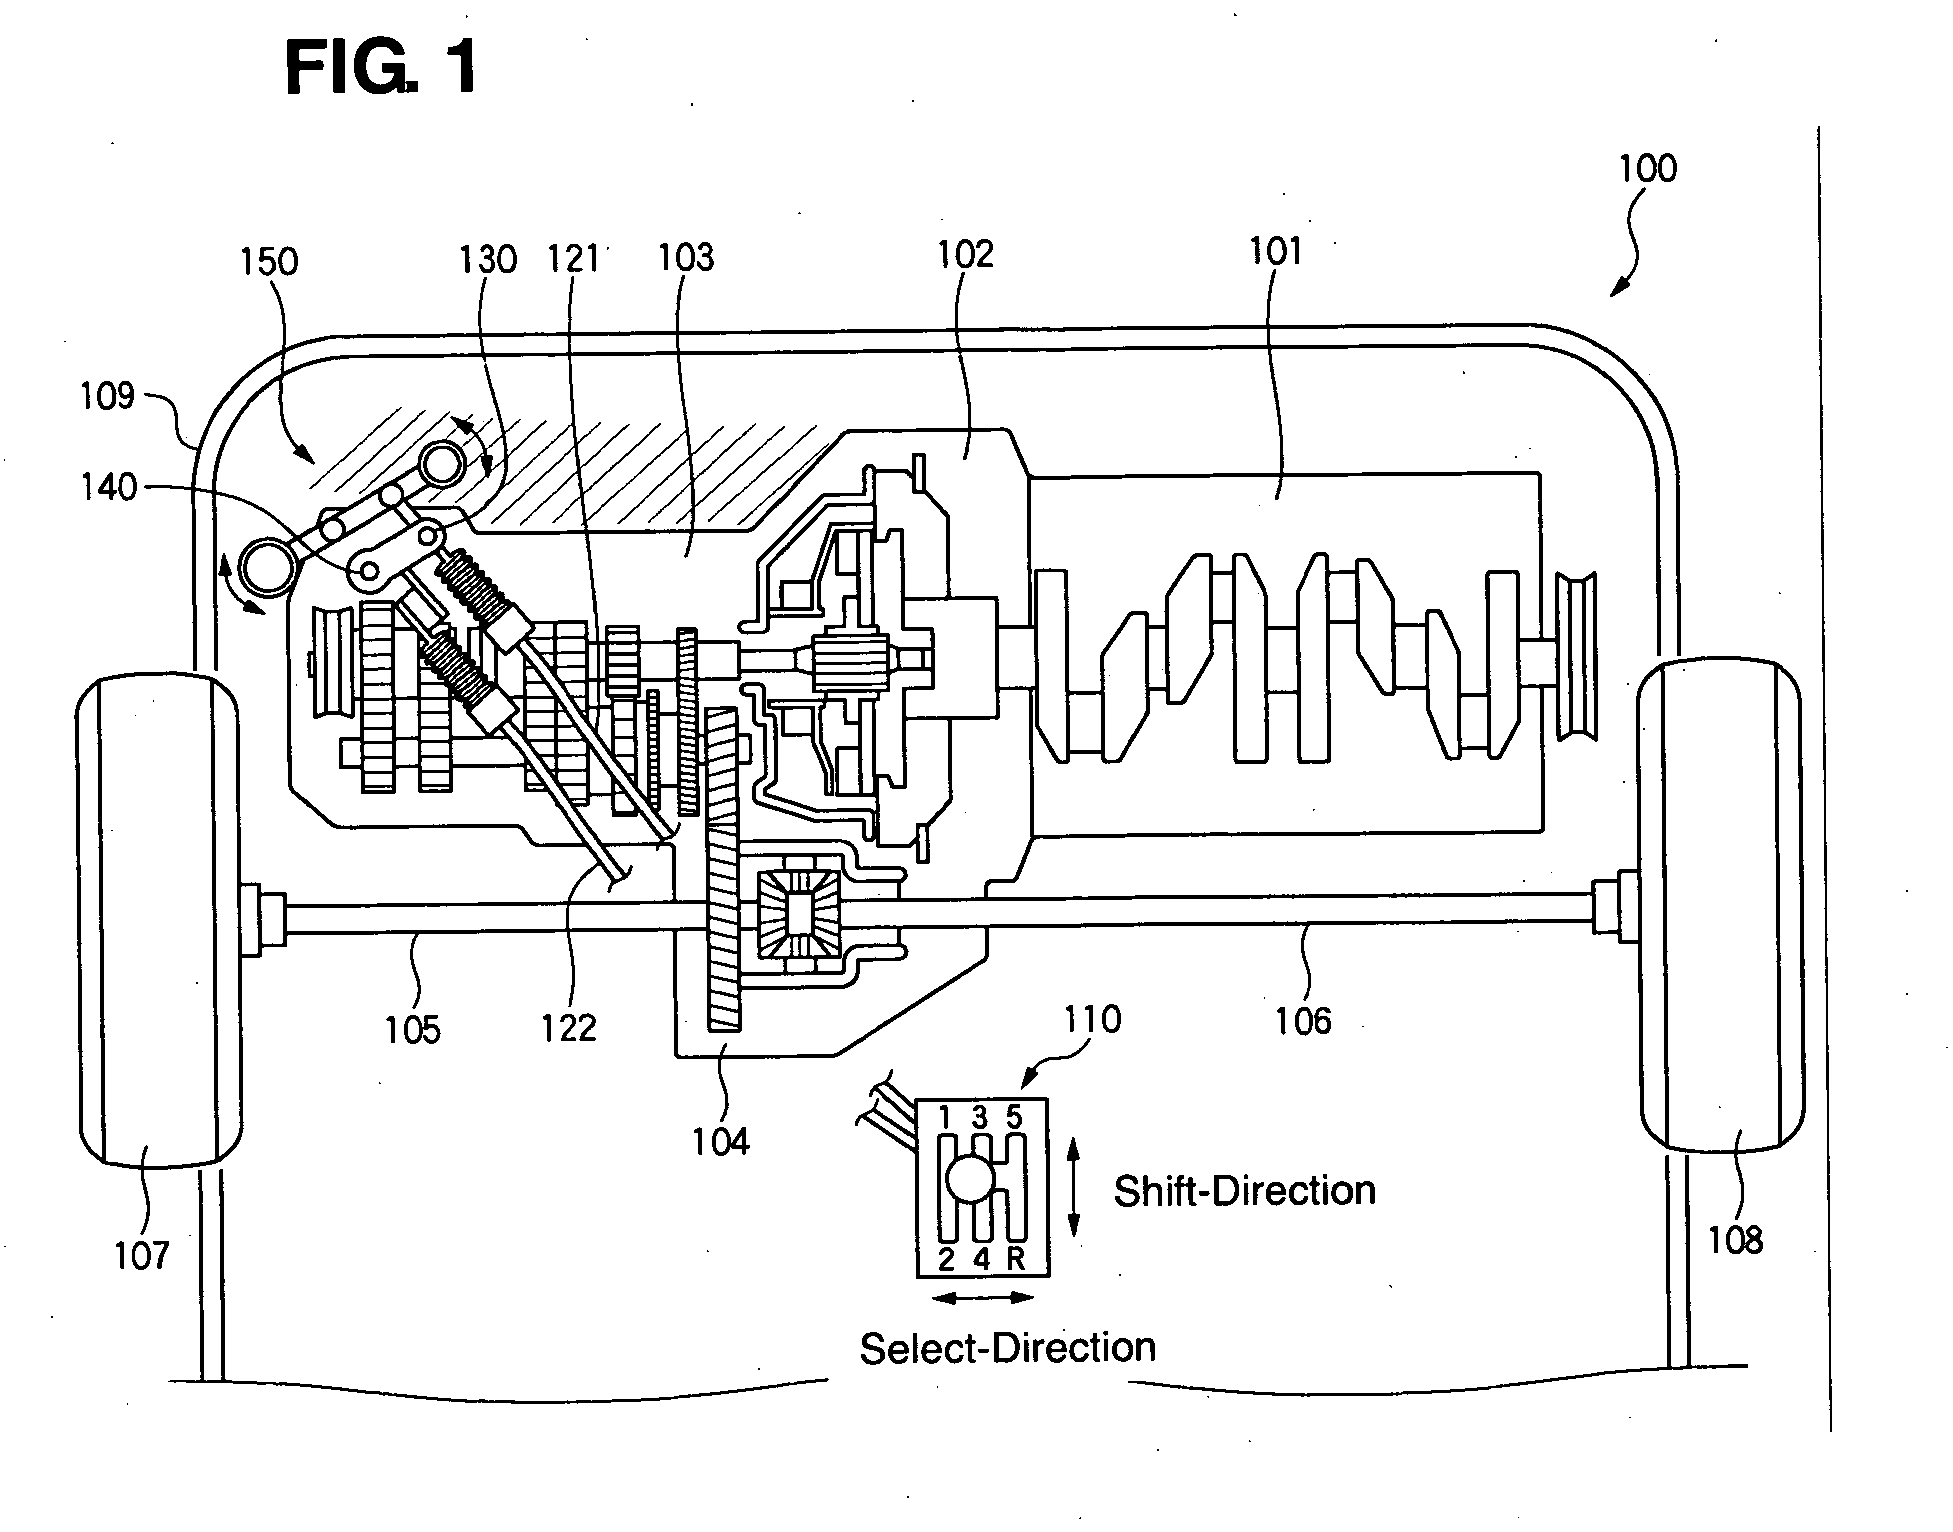 Transmission equipped with cable-type shift device